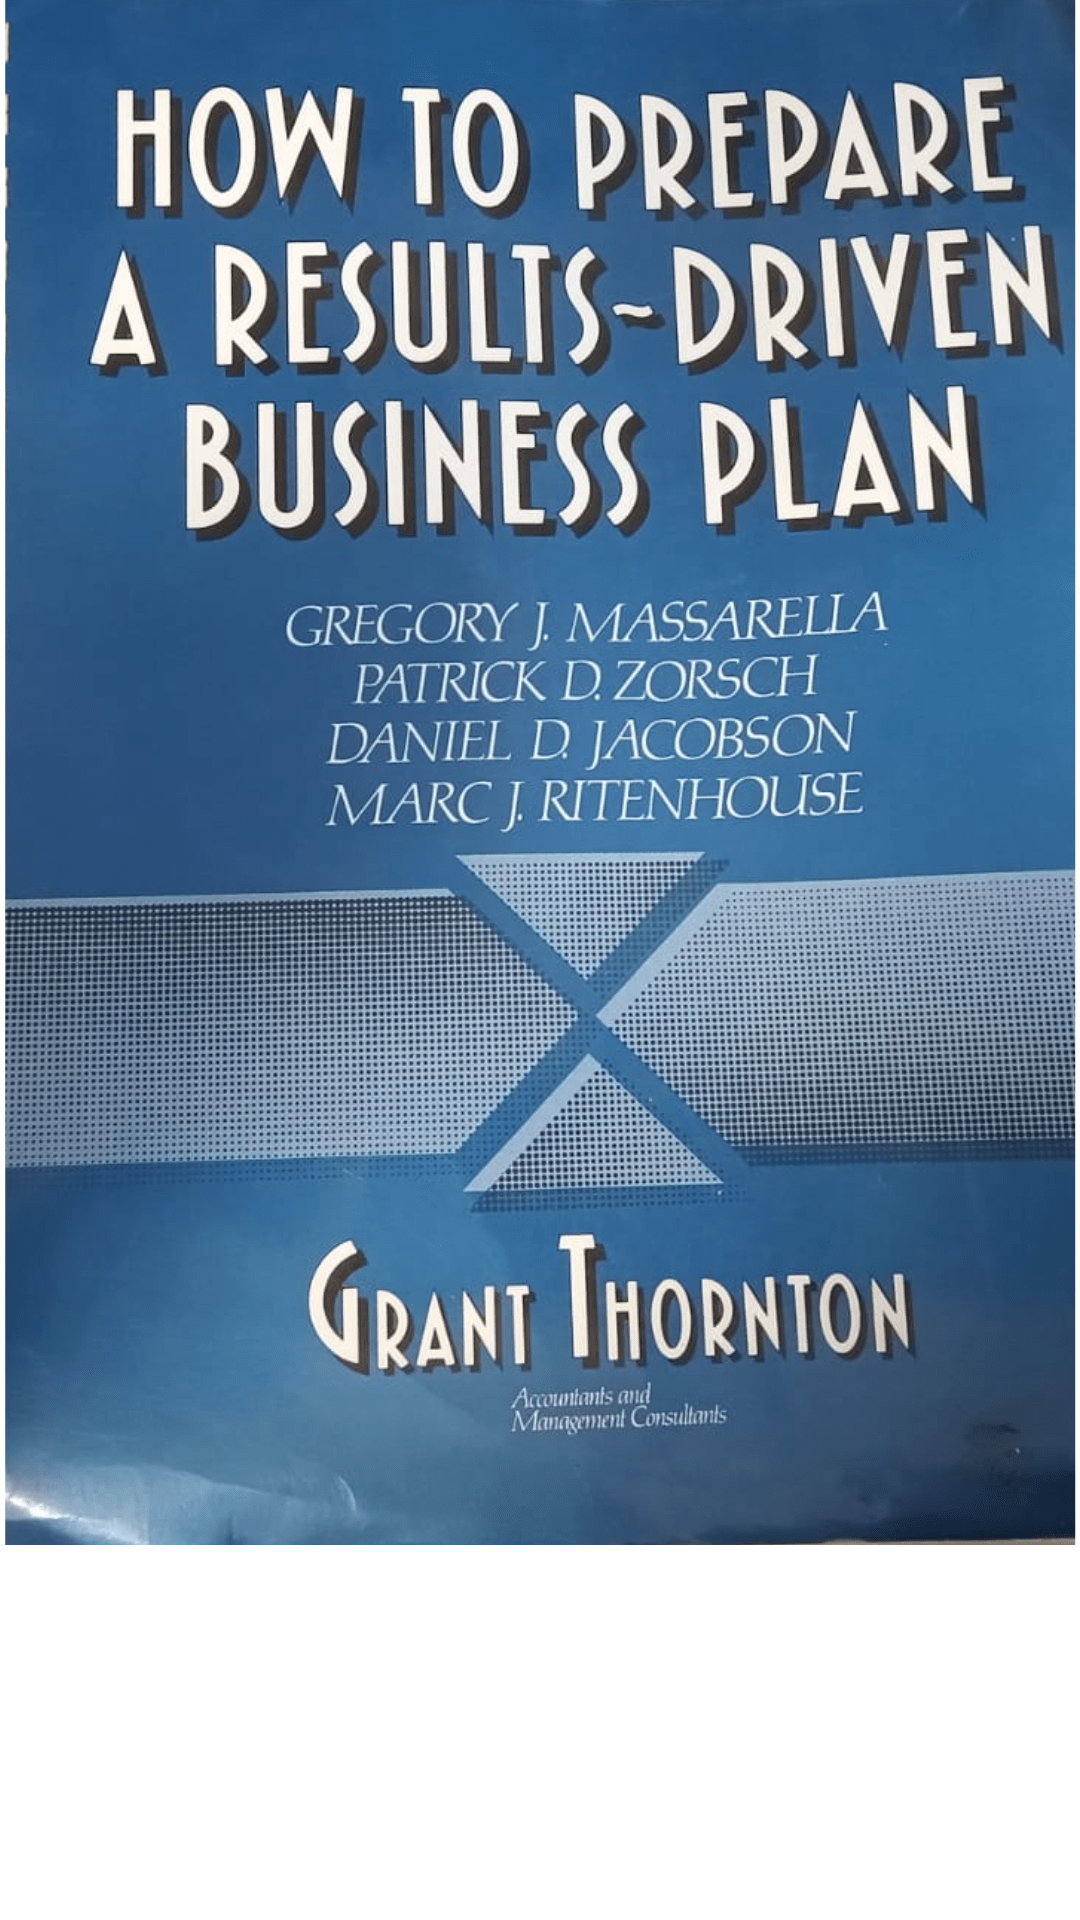 How to Prepare a Results-Driven Business Plan